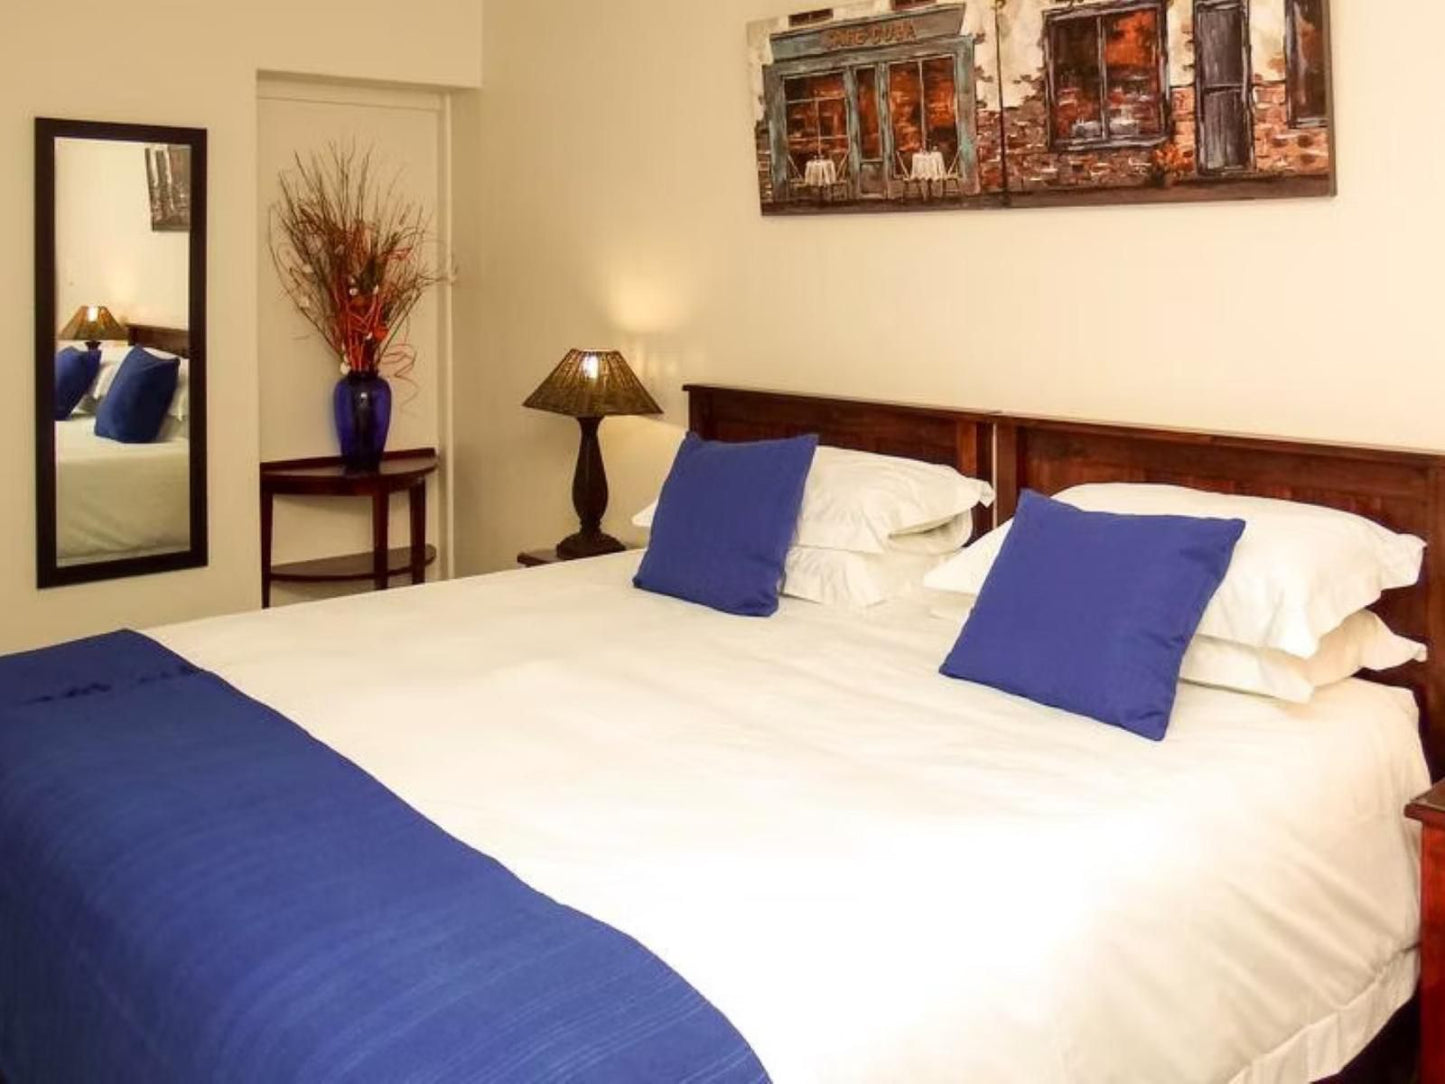 39 On Nile Guesthouse Perridgevale Port Elizabeth Eastern Cape South Africa Complementary Colors, Bedroom